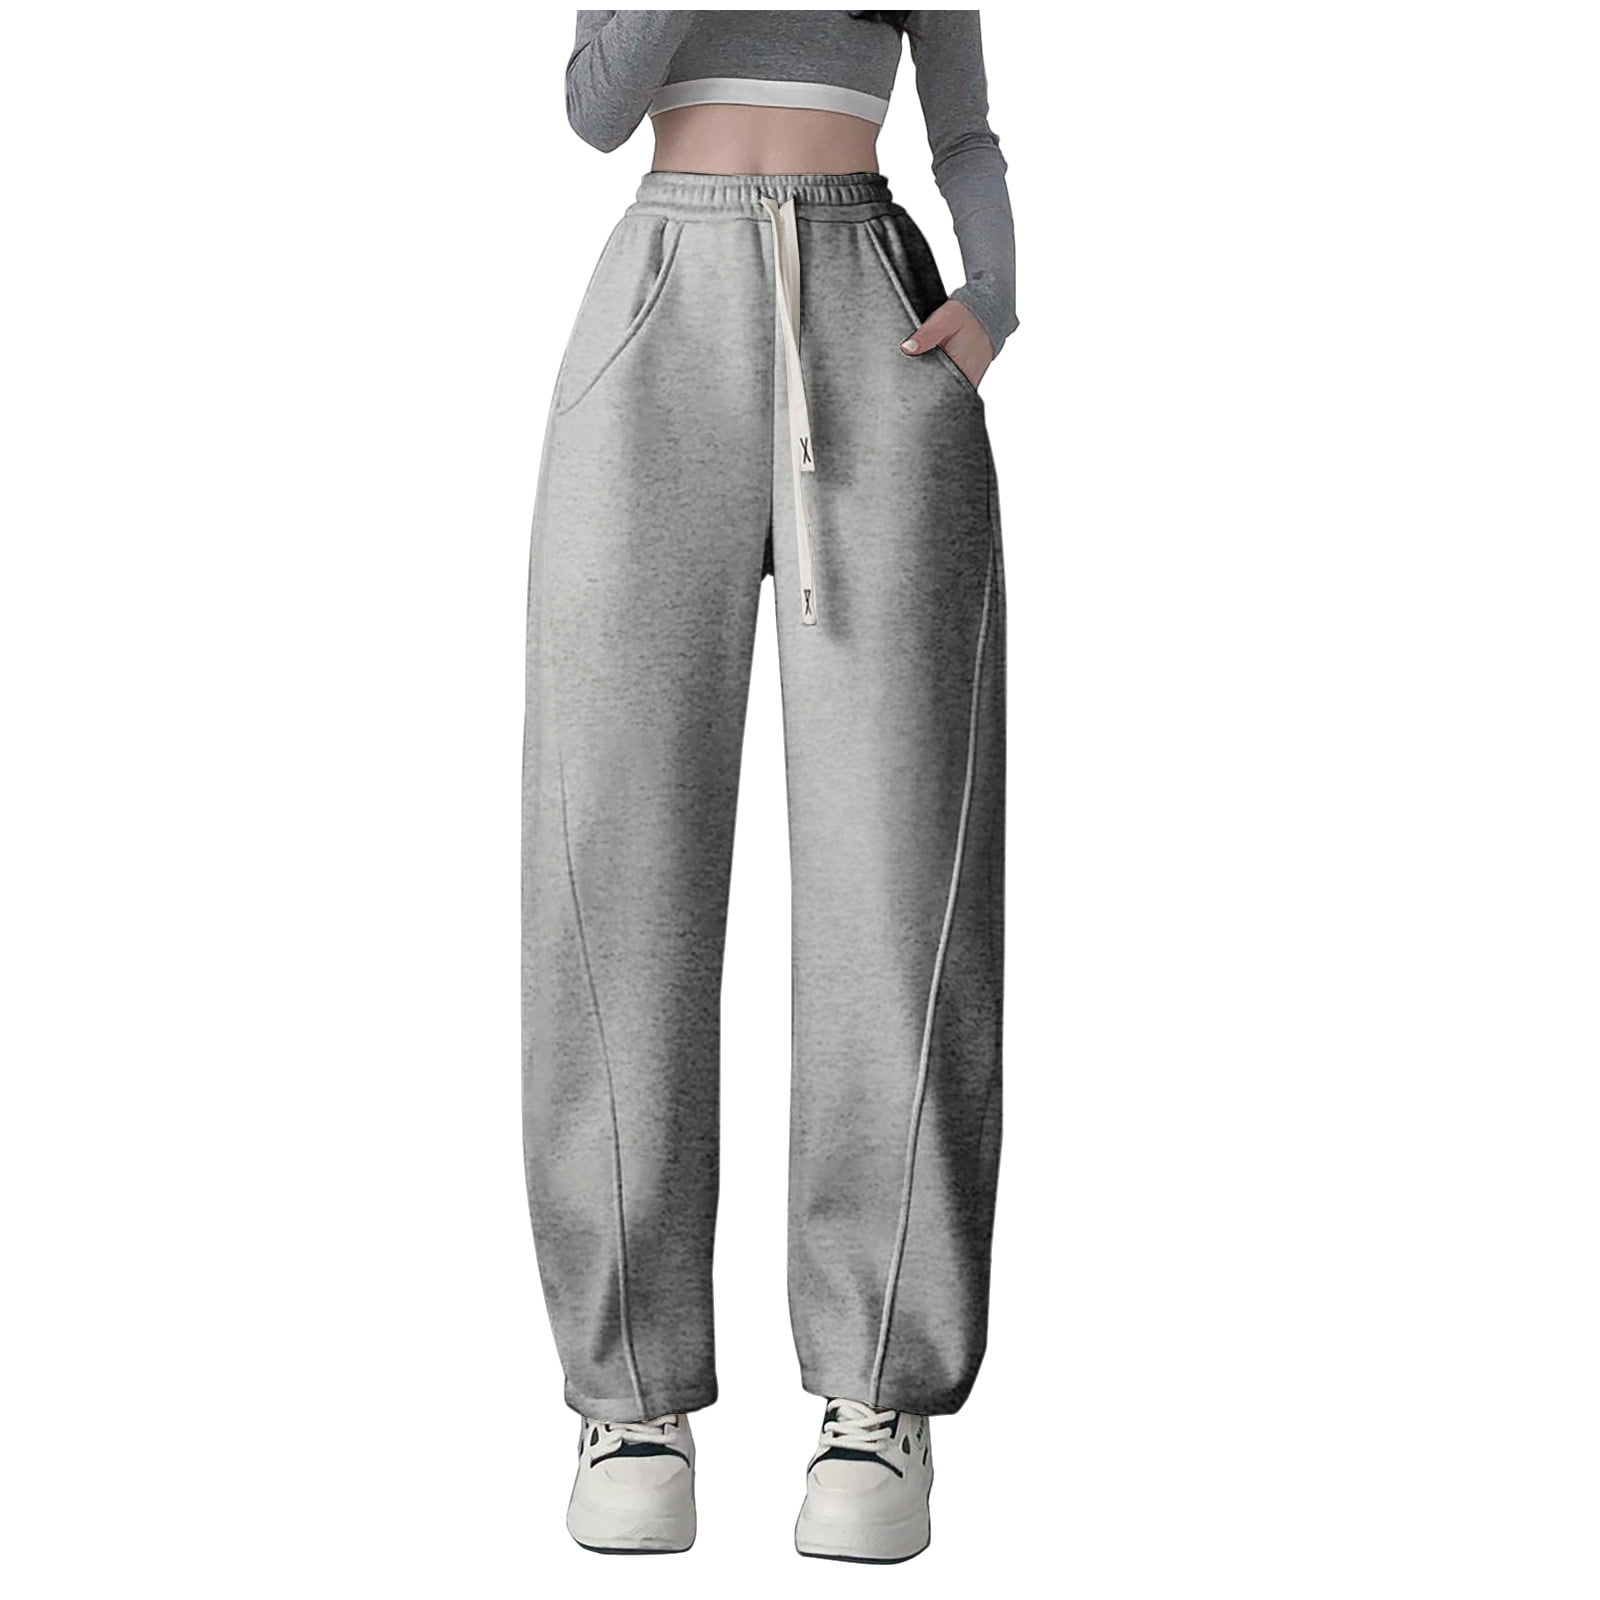 🆀🆄🅴🅴🅽 🅿🅸🆂🅲🅴🆂 💎 on X: Now these sweatpants in Walmart are cute  asf! 😌  / X